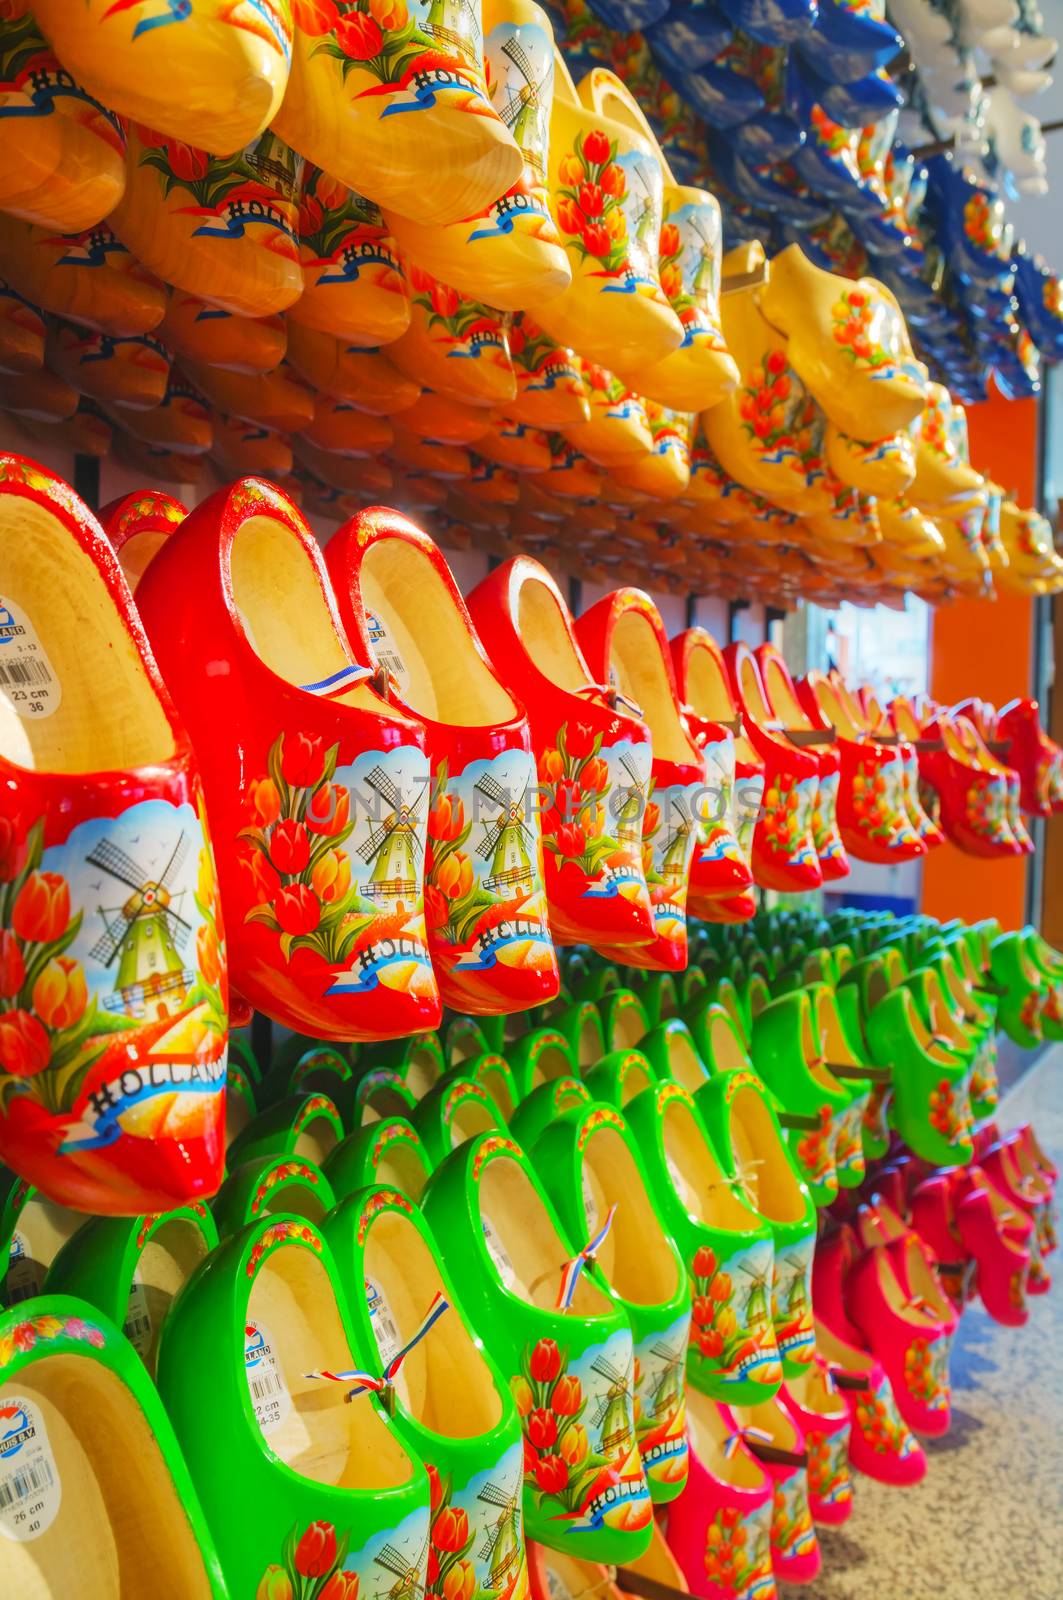 AMSTERDAM - APRIL 16: Colourful traditional Dutch wooden shoes (klomps) on April 16, 2015 in Amsterdam. Approximately 3 million pairs of klompen are made each year and sold throughout the Netherlands.